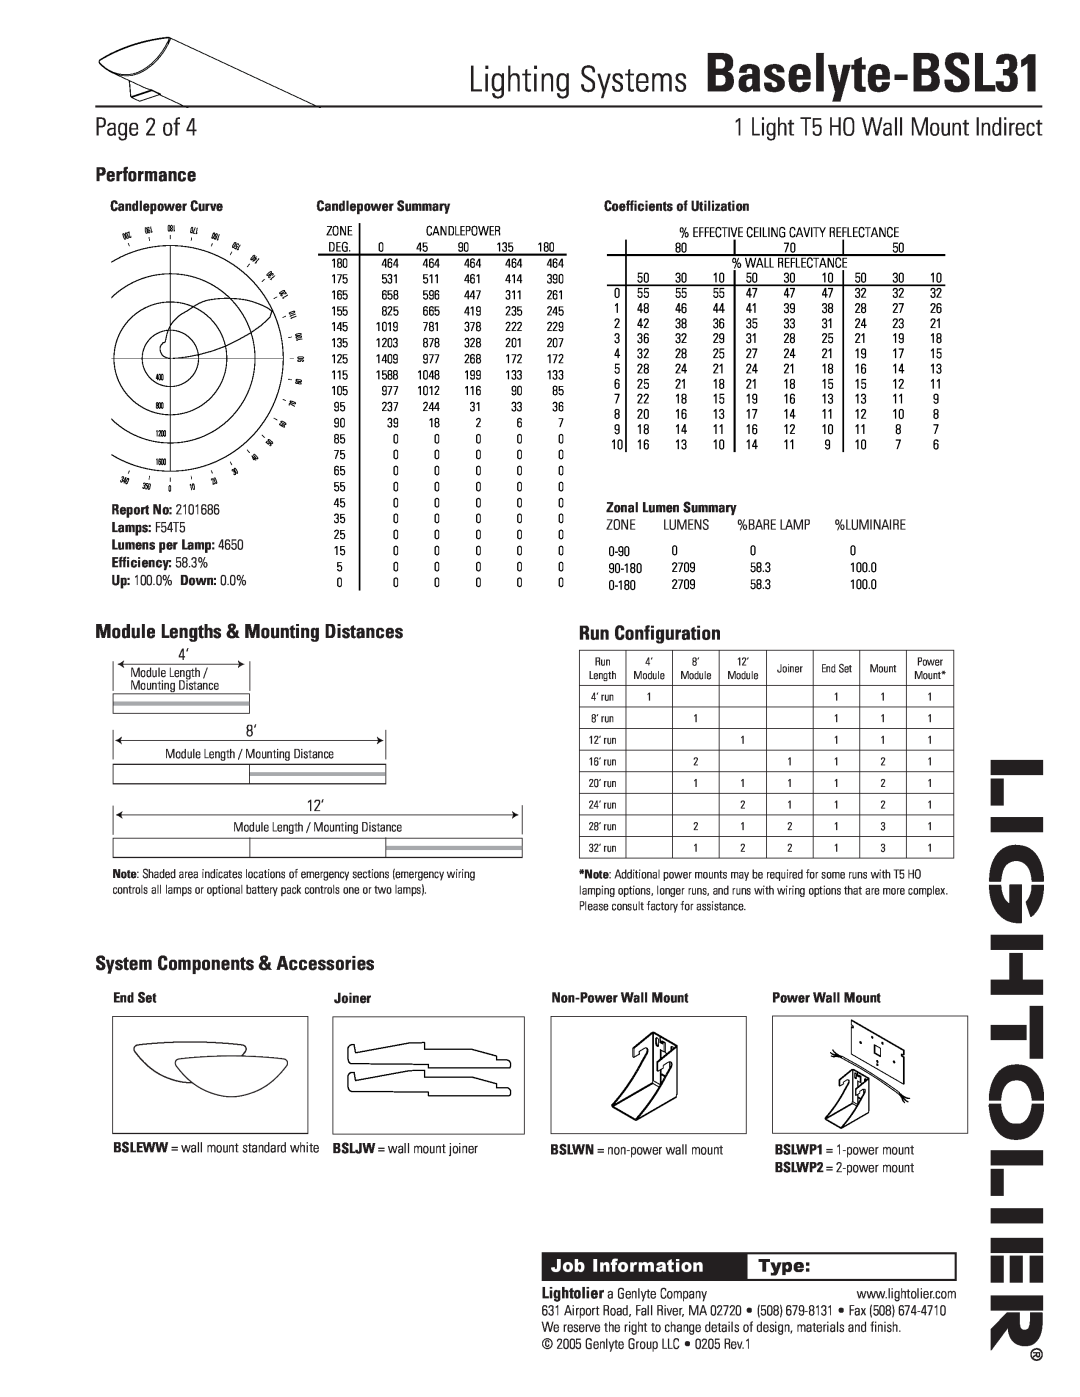 Lightolier Lighting Systems Baselyte-BSL31, Page of,  Light T5 HO Wall Mount Indirect, Performance, Run Configuration 